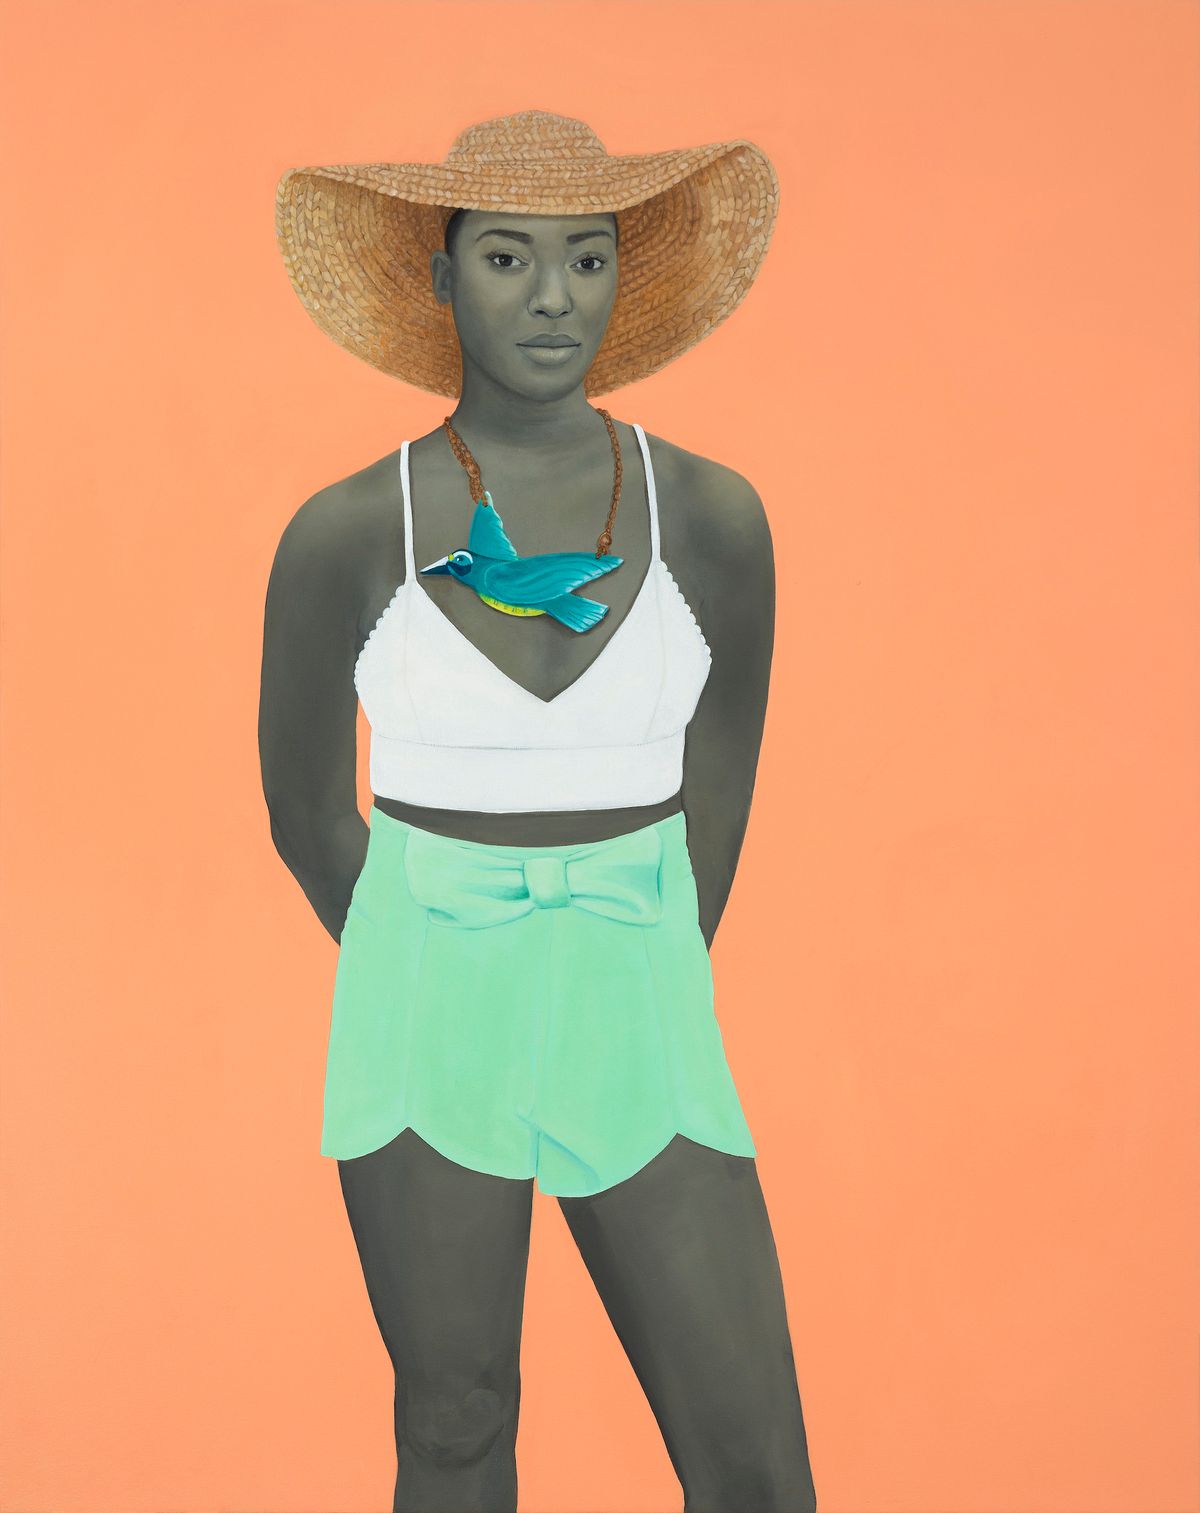 Amy Sherald, All the Unforgotten Bliss (the Early Bird), 2017, Collection of Beth Rudin DeWoody Courtesy of the artist and Monique Meloche Gallery, Chicago